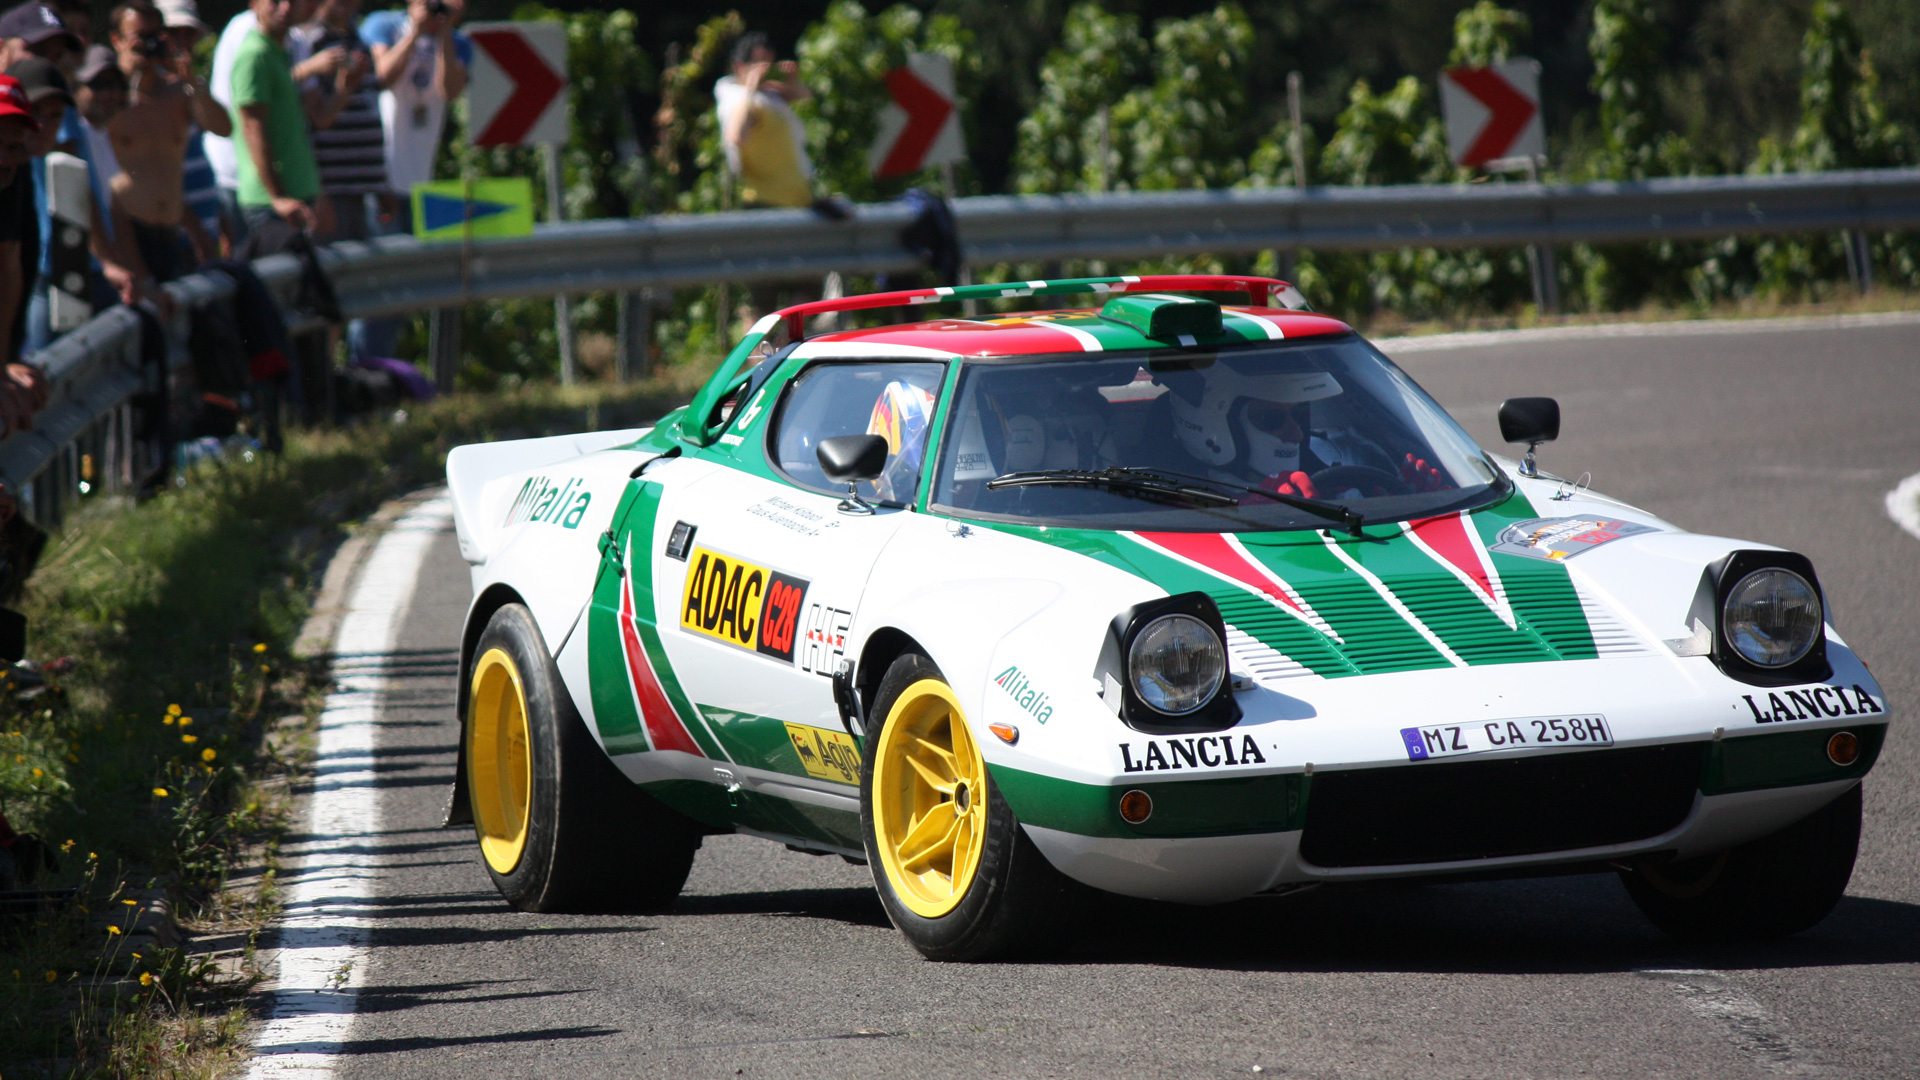 General 1920x1080 Lancia Stratos car racing race cars pop-up headlights Castrol livery colored wheels livery